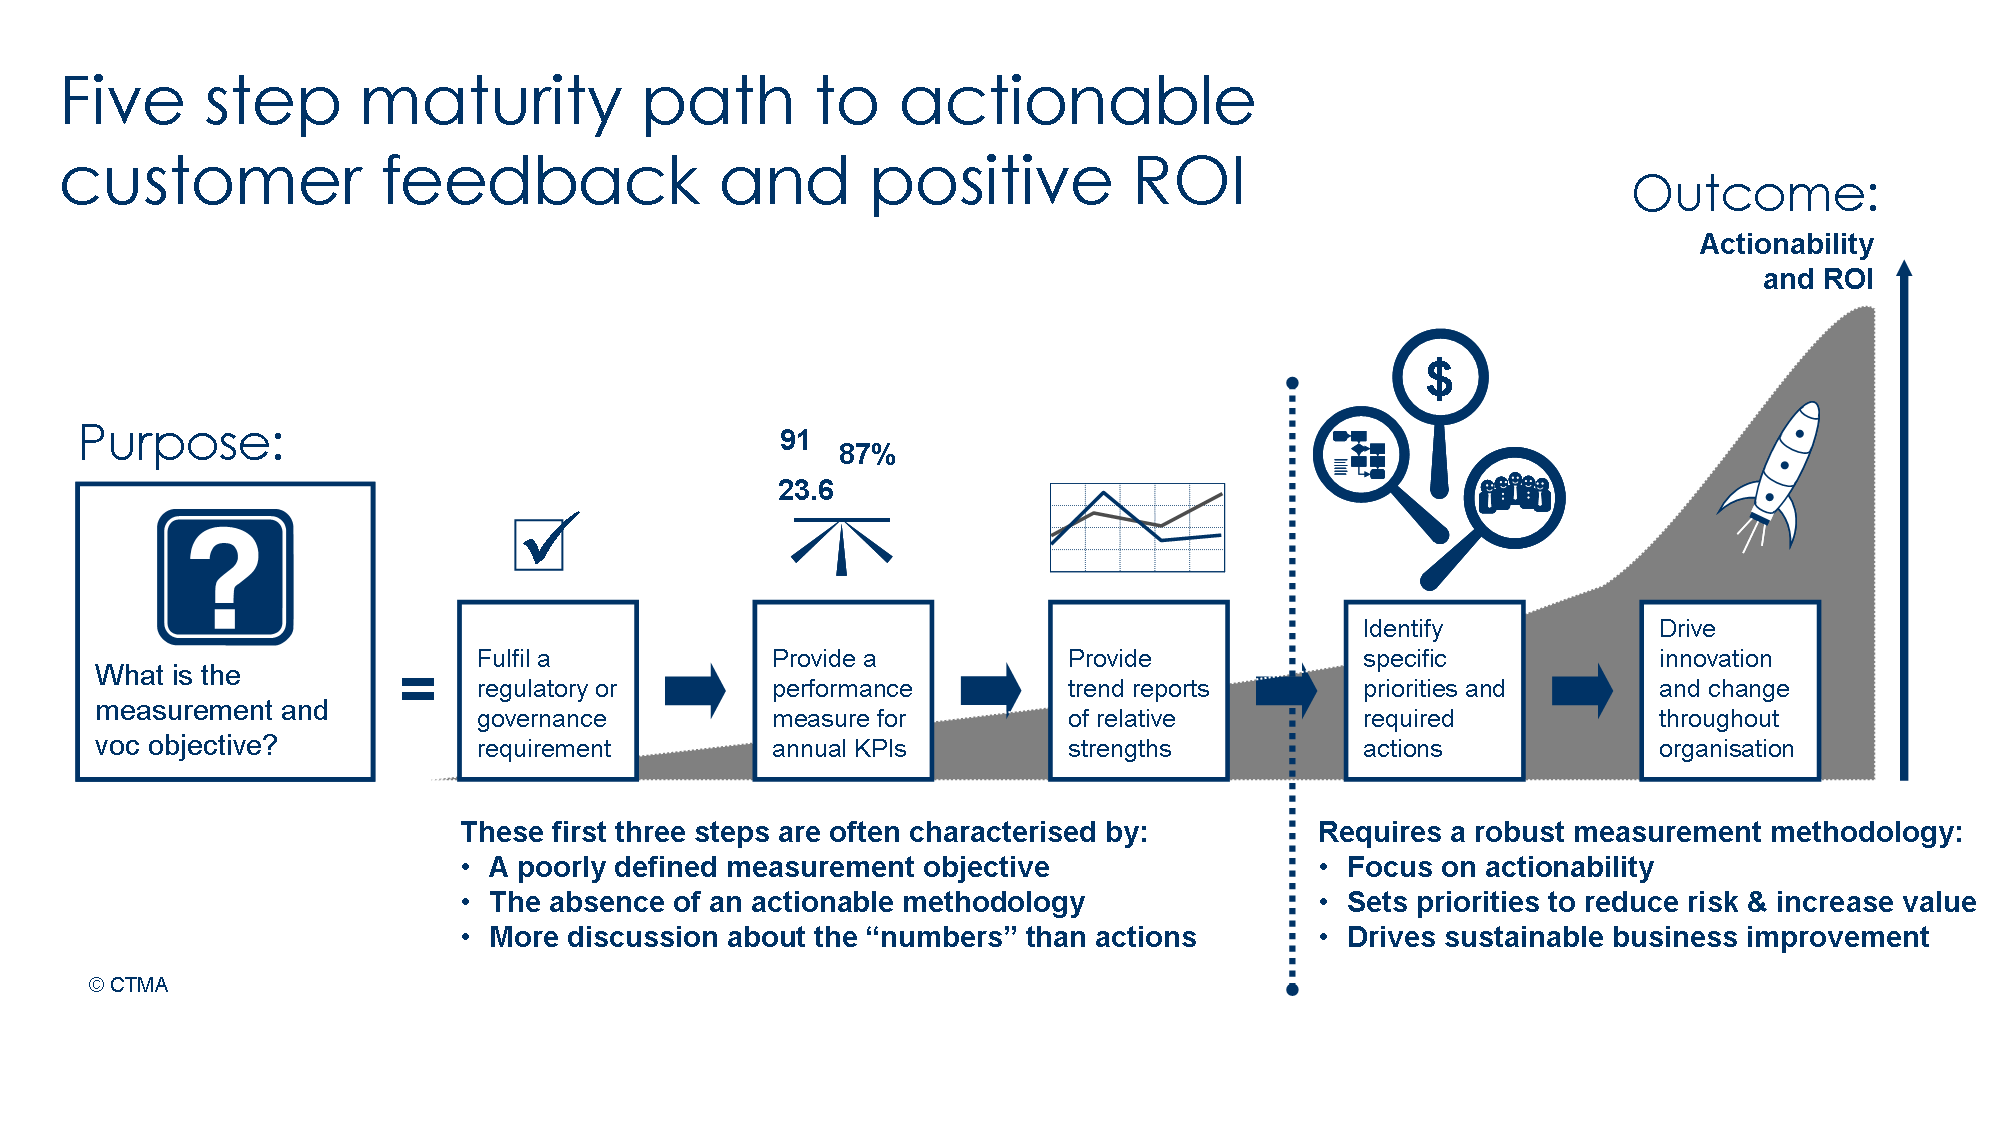 Five Step Maturity Path to Actionable Customer Feedback and Positive ROI